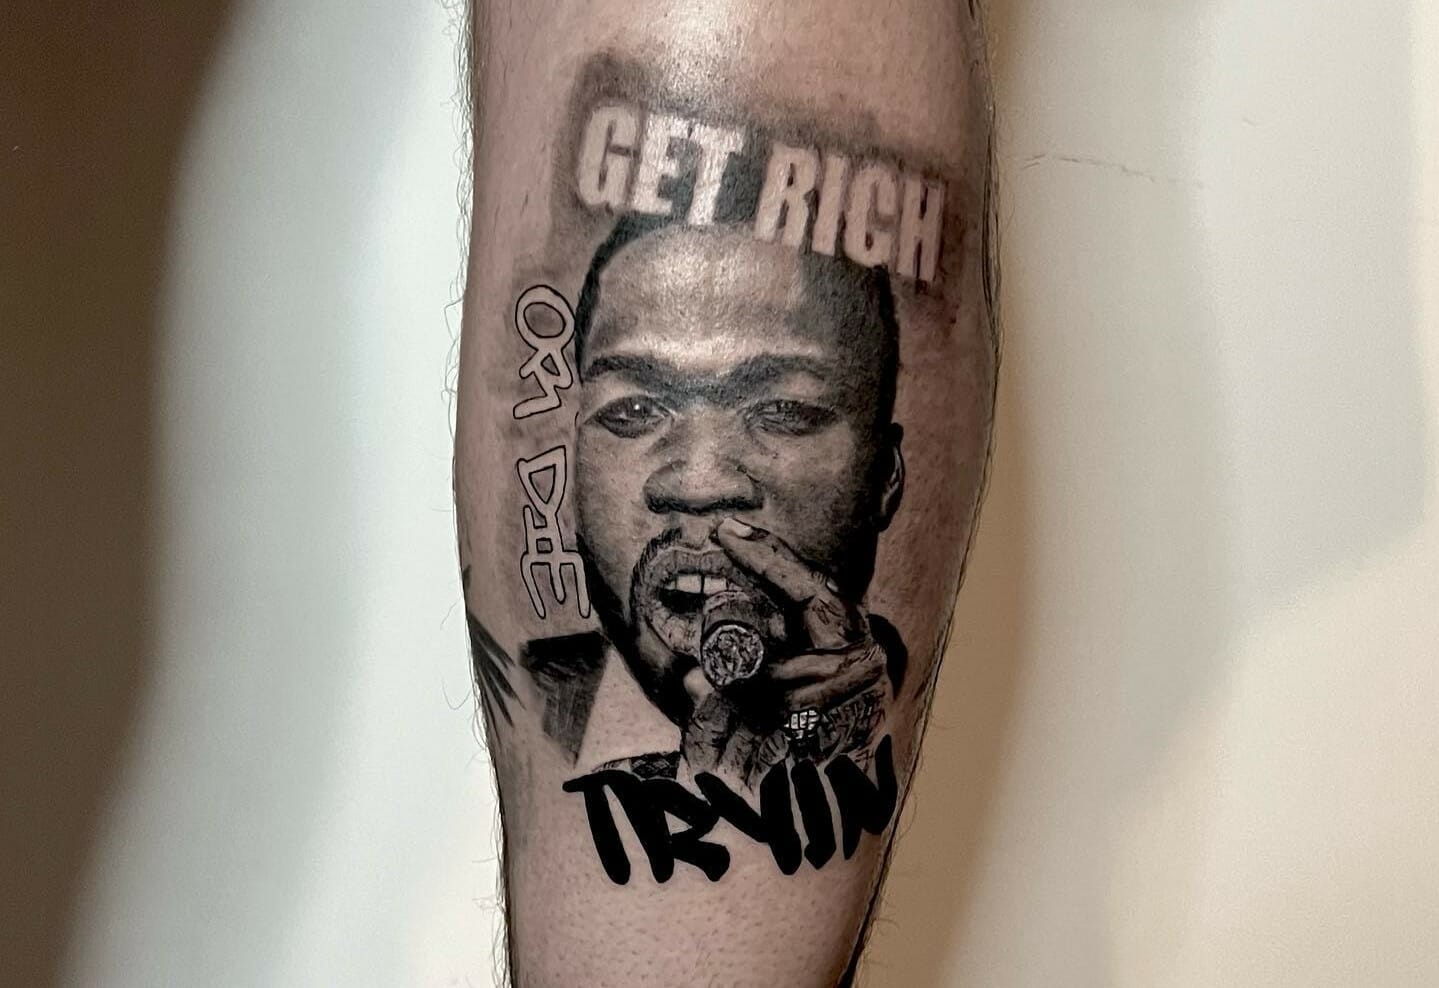 Show Yoh Trends After His Poorly Done Tattoo Of 50 Cent Goes Viral